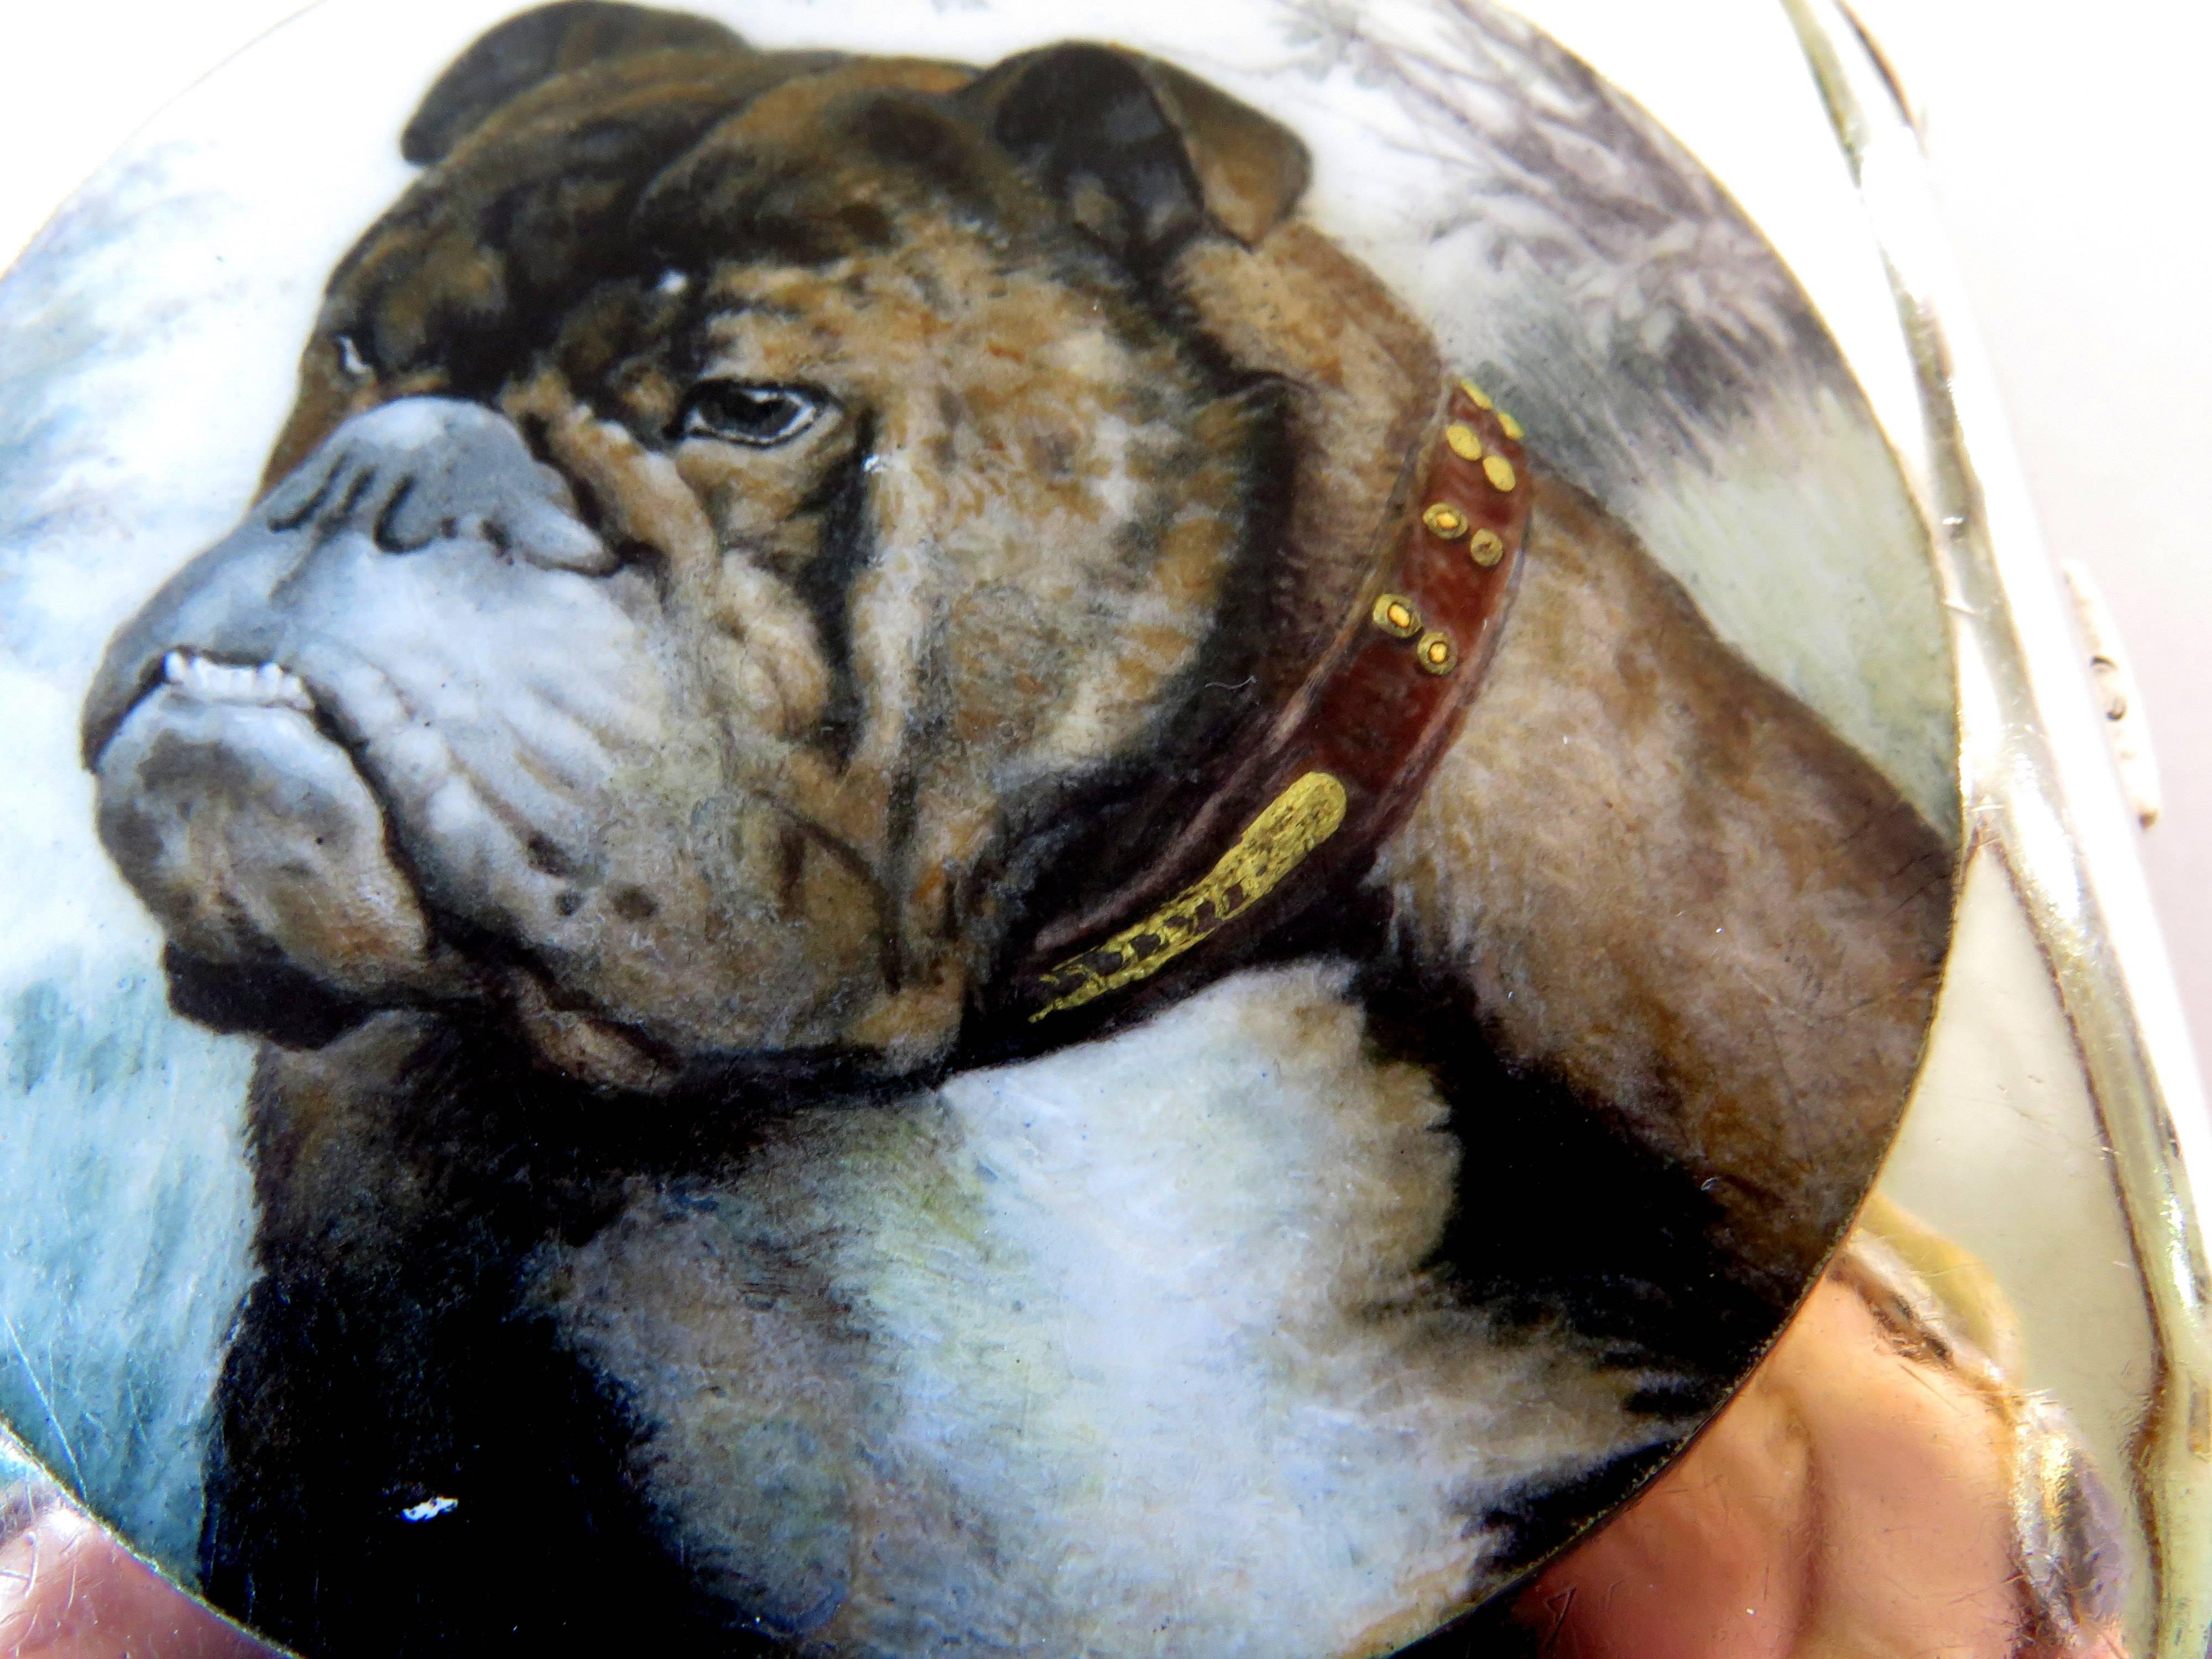 This wonderfully enameled bulldog box was originally a cigarette box, but it can be used for anything such as pill box, card case, Altoids container, etc.  It is made of 935 silver (high grade sterling silver) There are hallmarks on box, but they